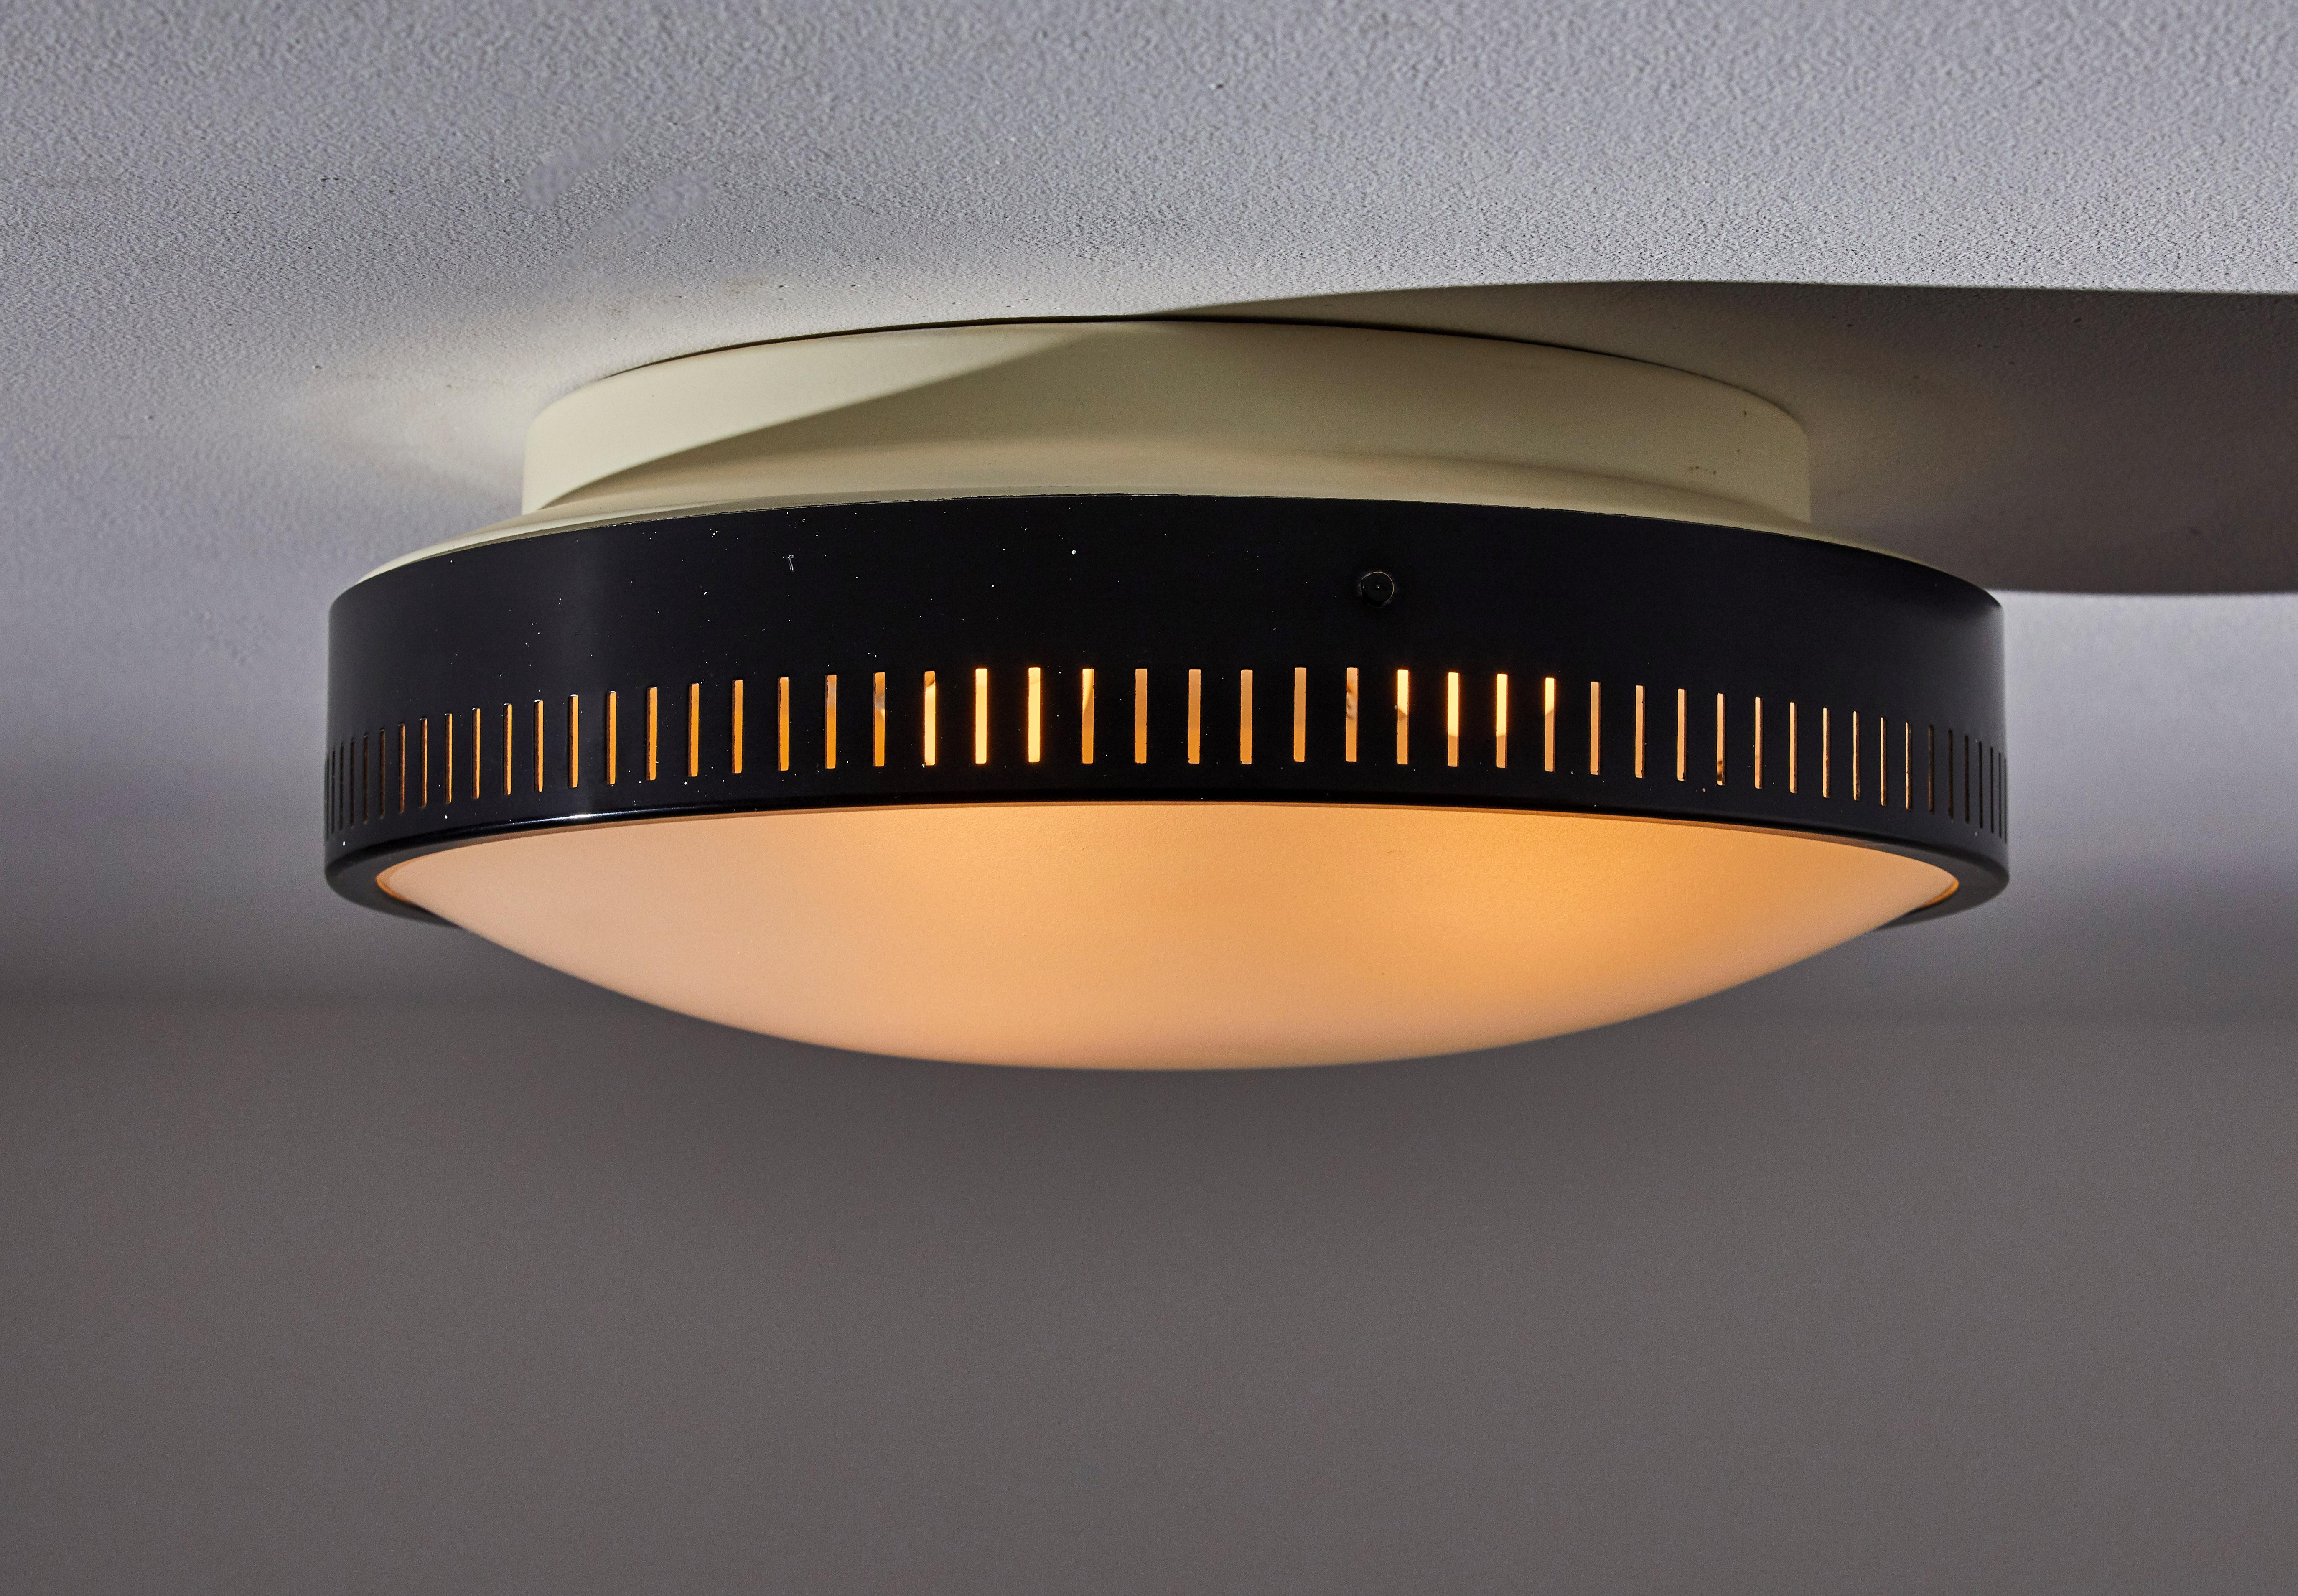 Flush mount ceiling light by Stilnovo. Manufactured in Italy, circa 1950s. Original enameled metal, opaline glass diffuser. Rewired for U.S. junction boxes. Takes three E27 60W maximum bulbs. Bulbs provided as a onetime courtesy.